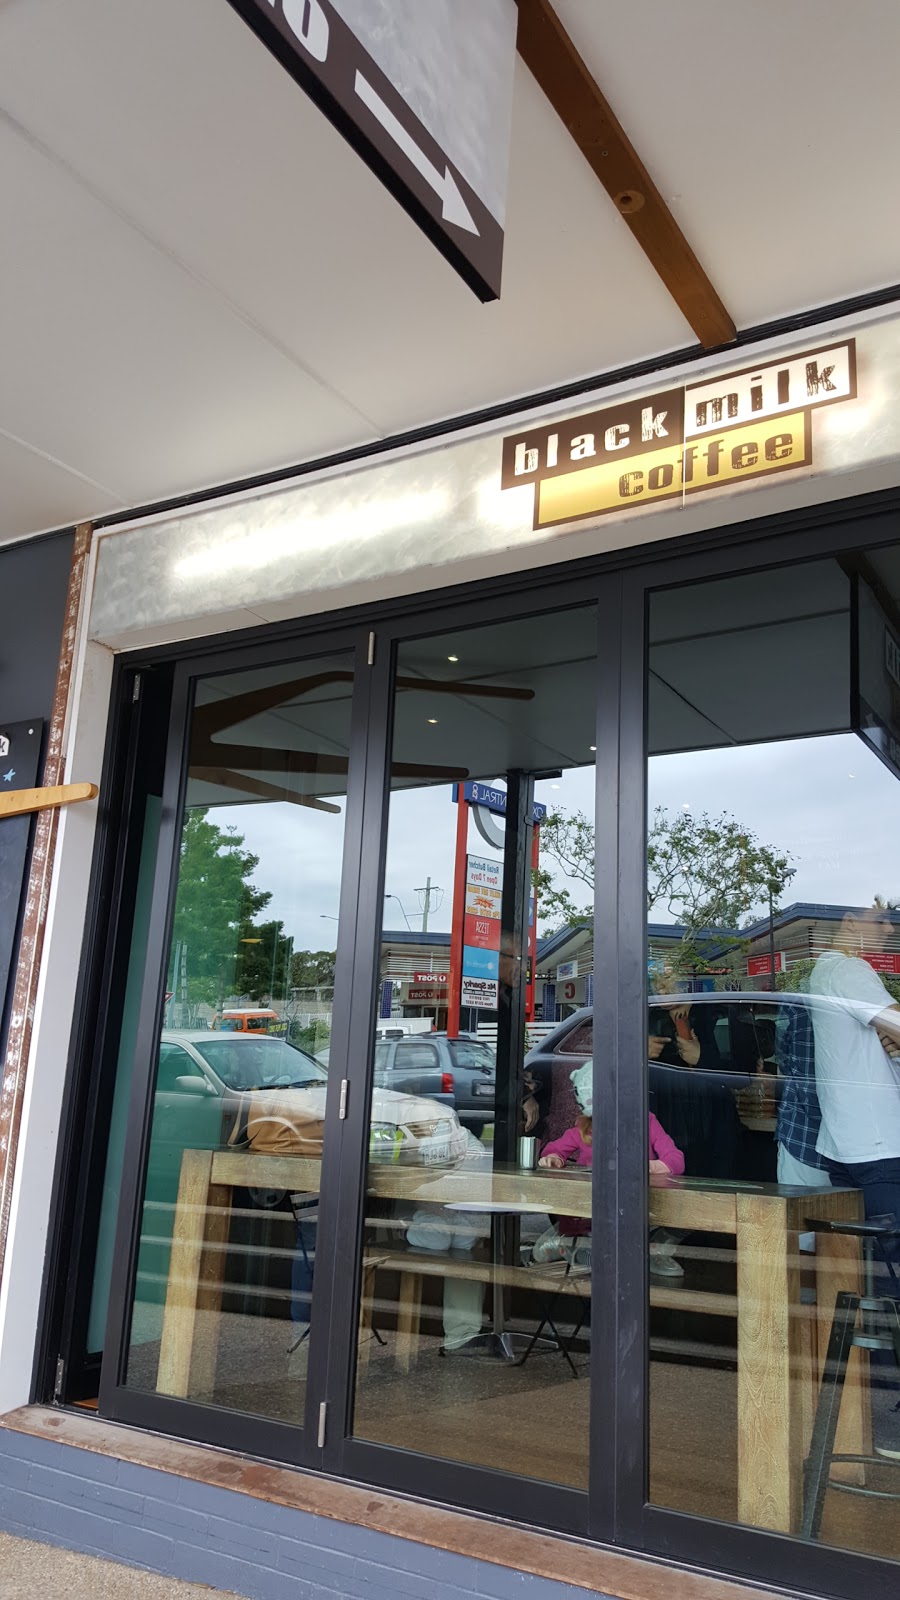 Black Milk Coffee | cafe | 167 Oxley Station Rd, Oxley QLD 4075, Australia | 0444531790 OR +61 444 531 790